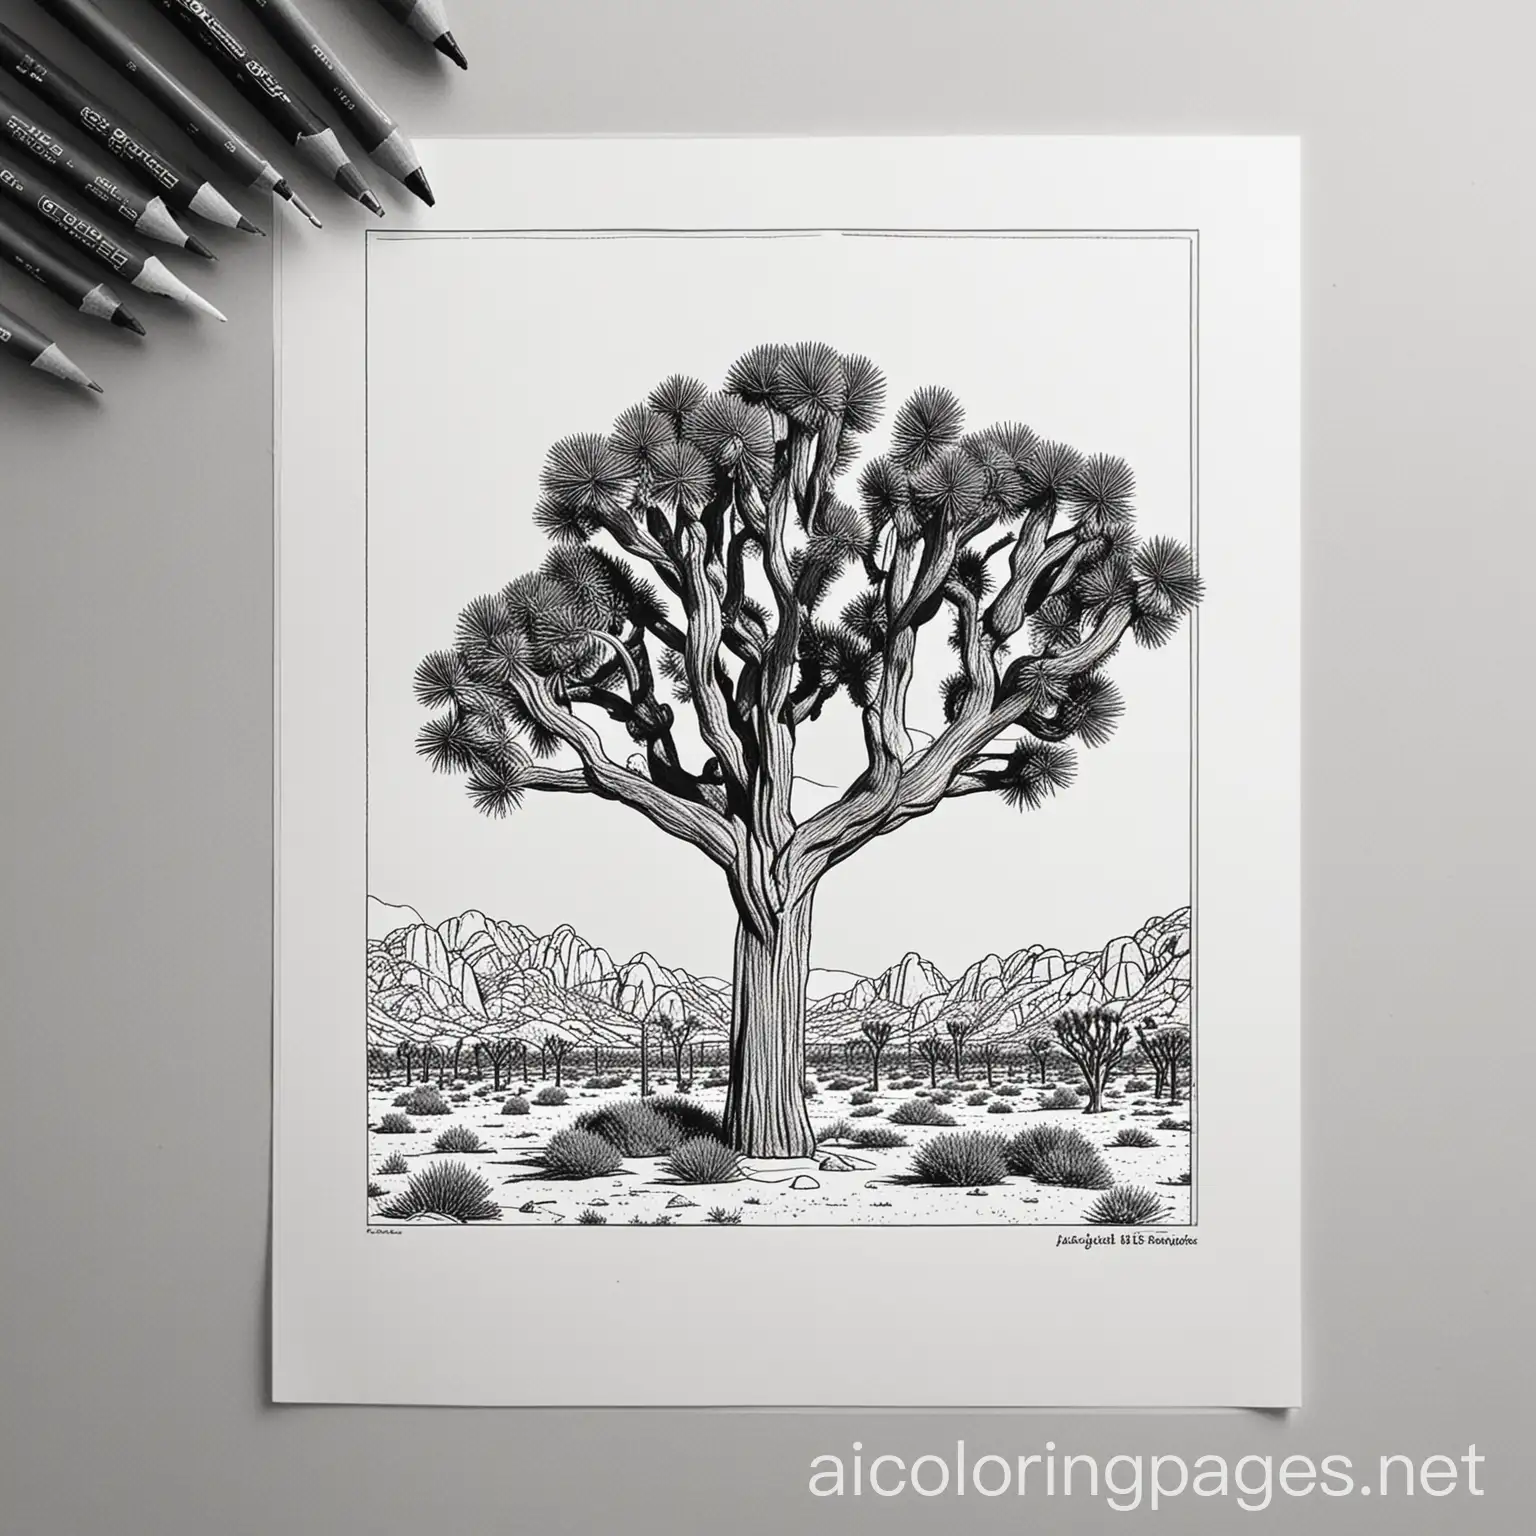 Joshua-Tree-National-Park-Coloring-Page-Simple-Line-Art-for-Young-Children